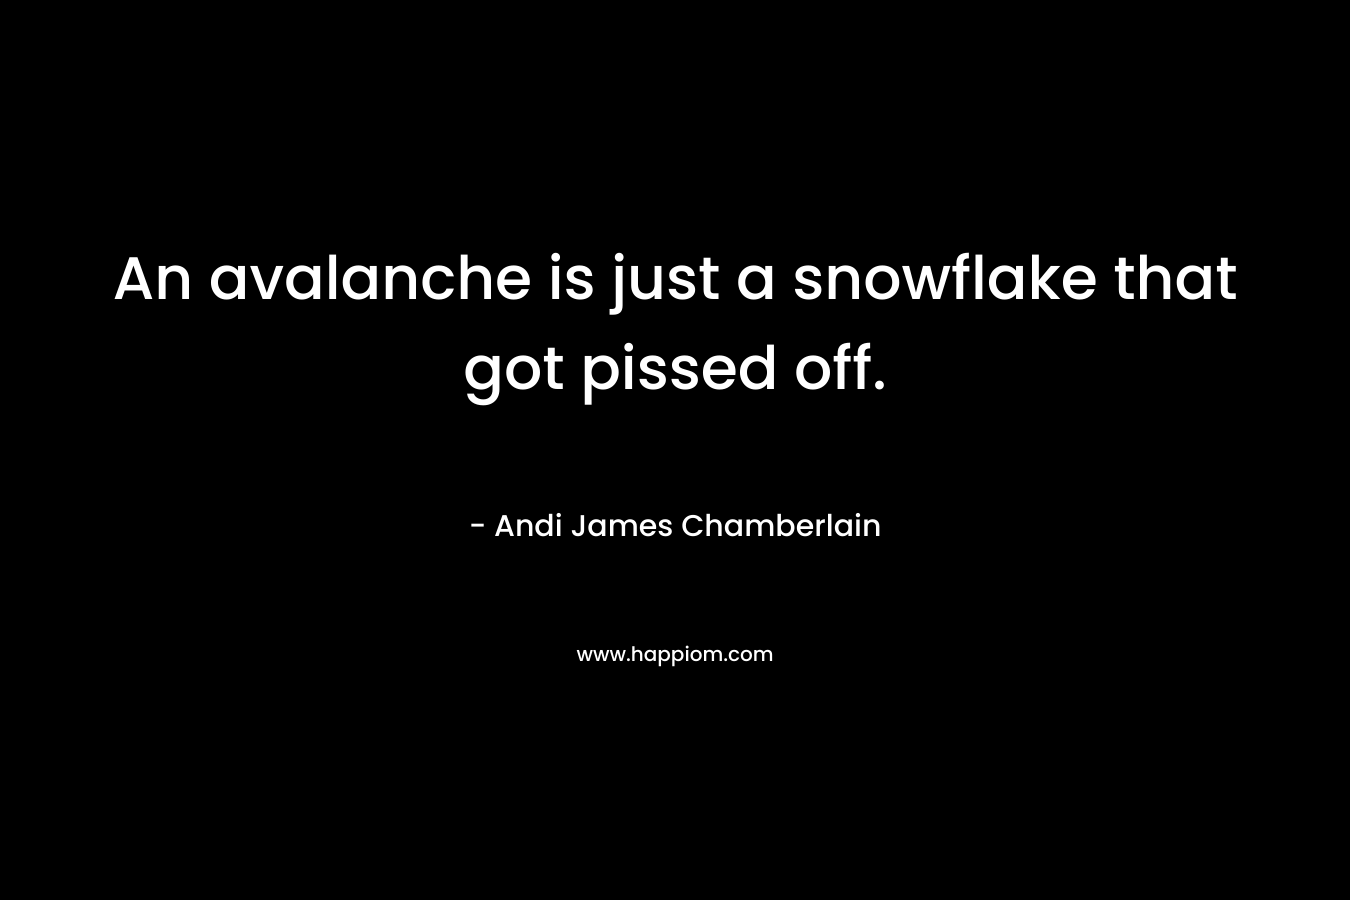 An avalanche is just a snowflake that got pissed off. – Andi James Chamberlain